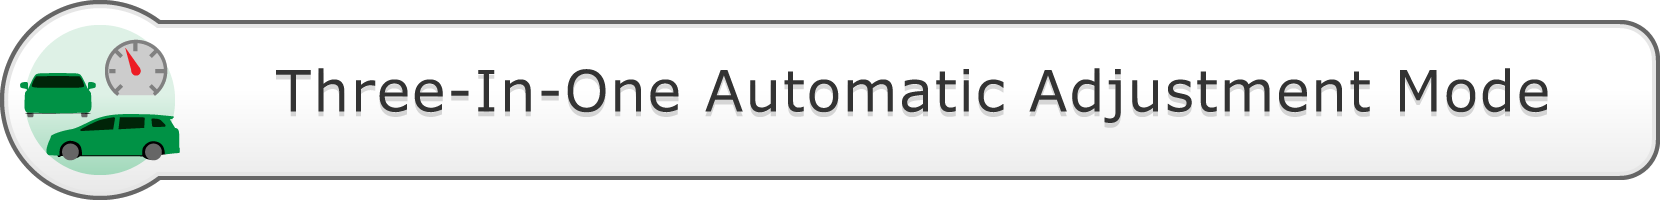 Three-In-One Automatic Adjustment Mode